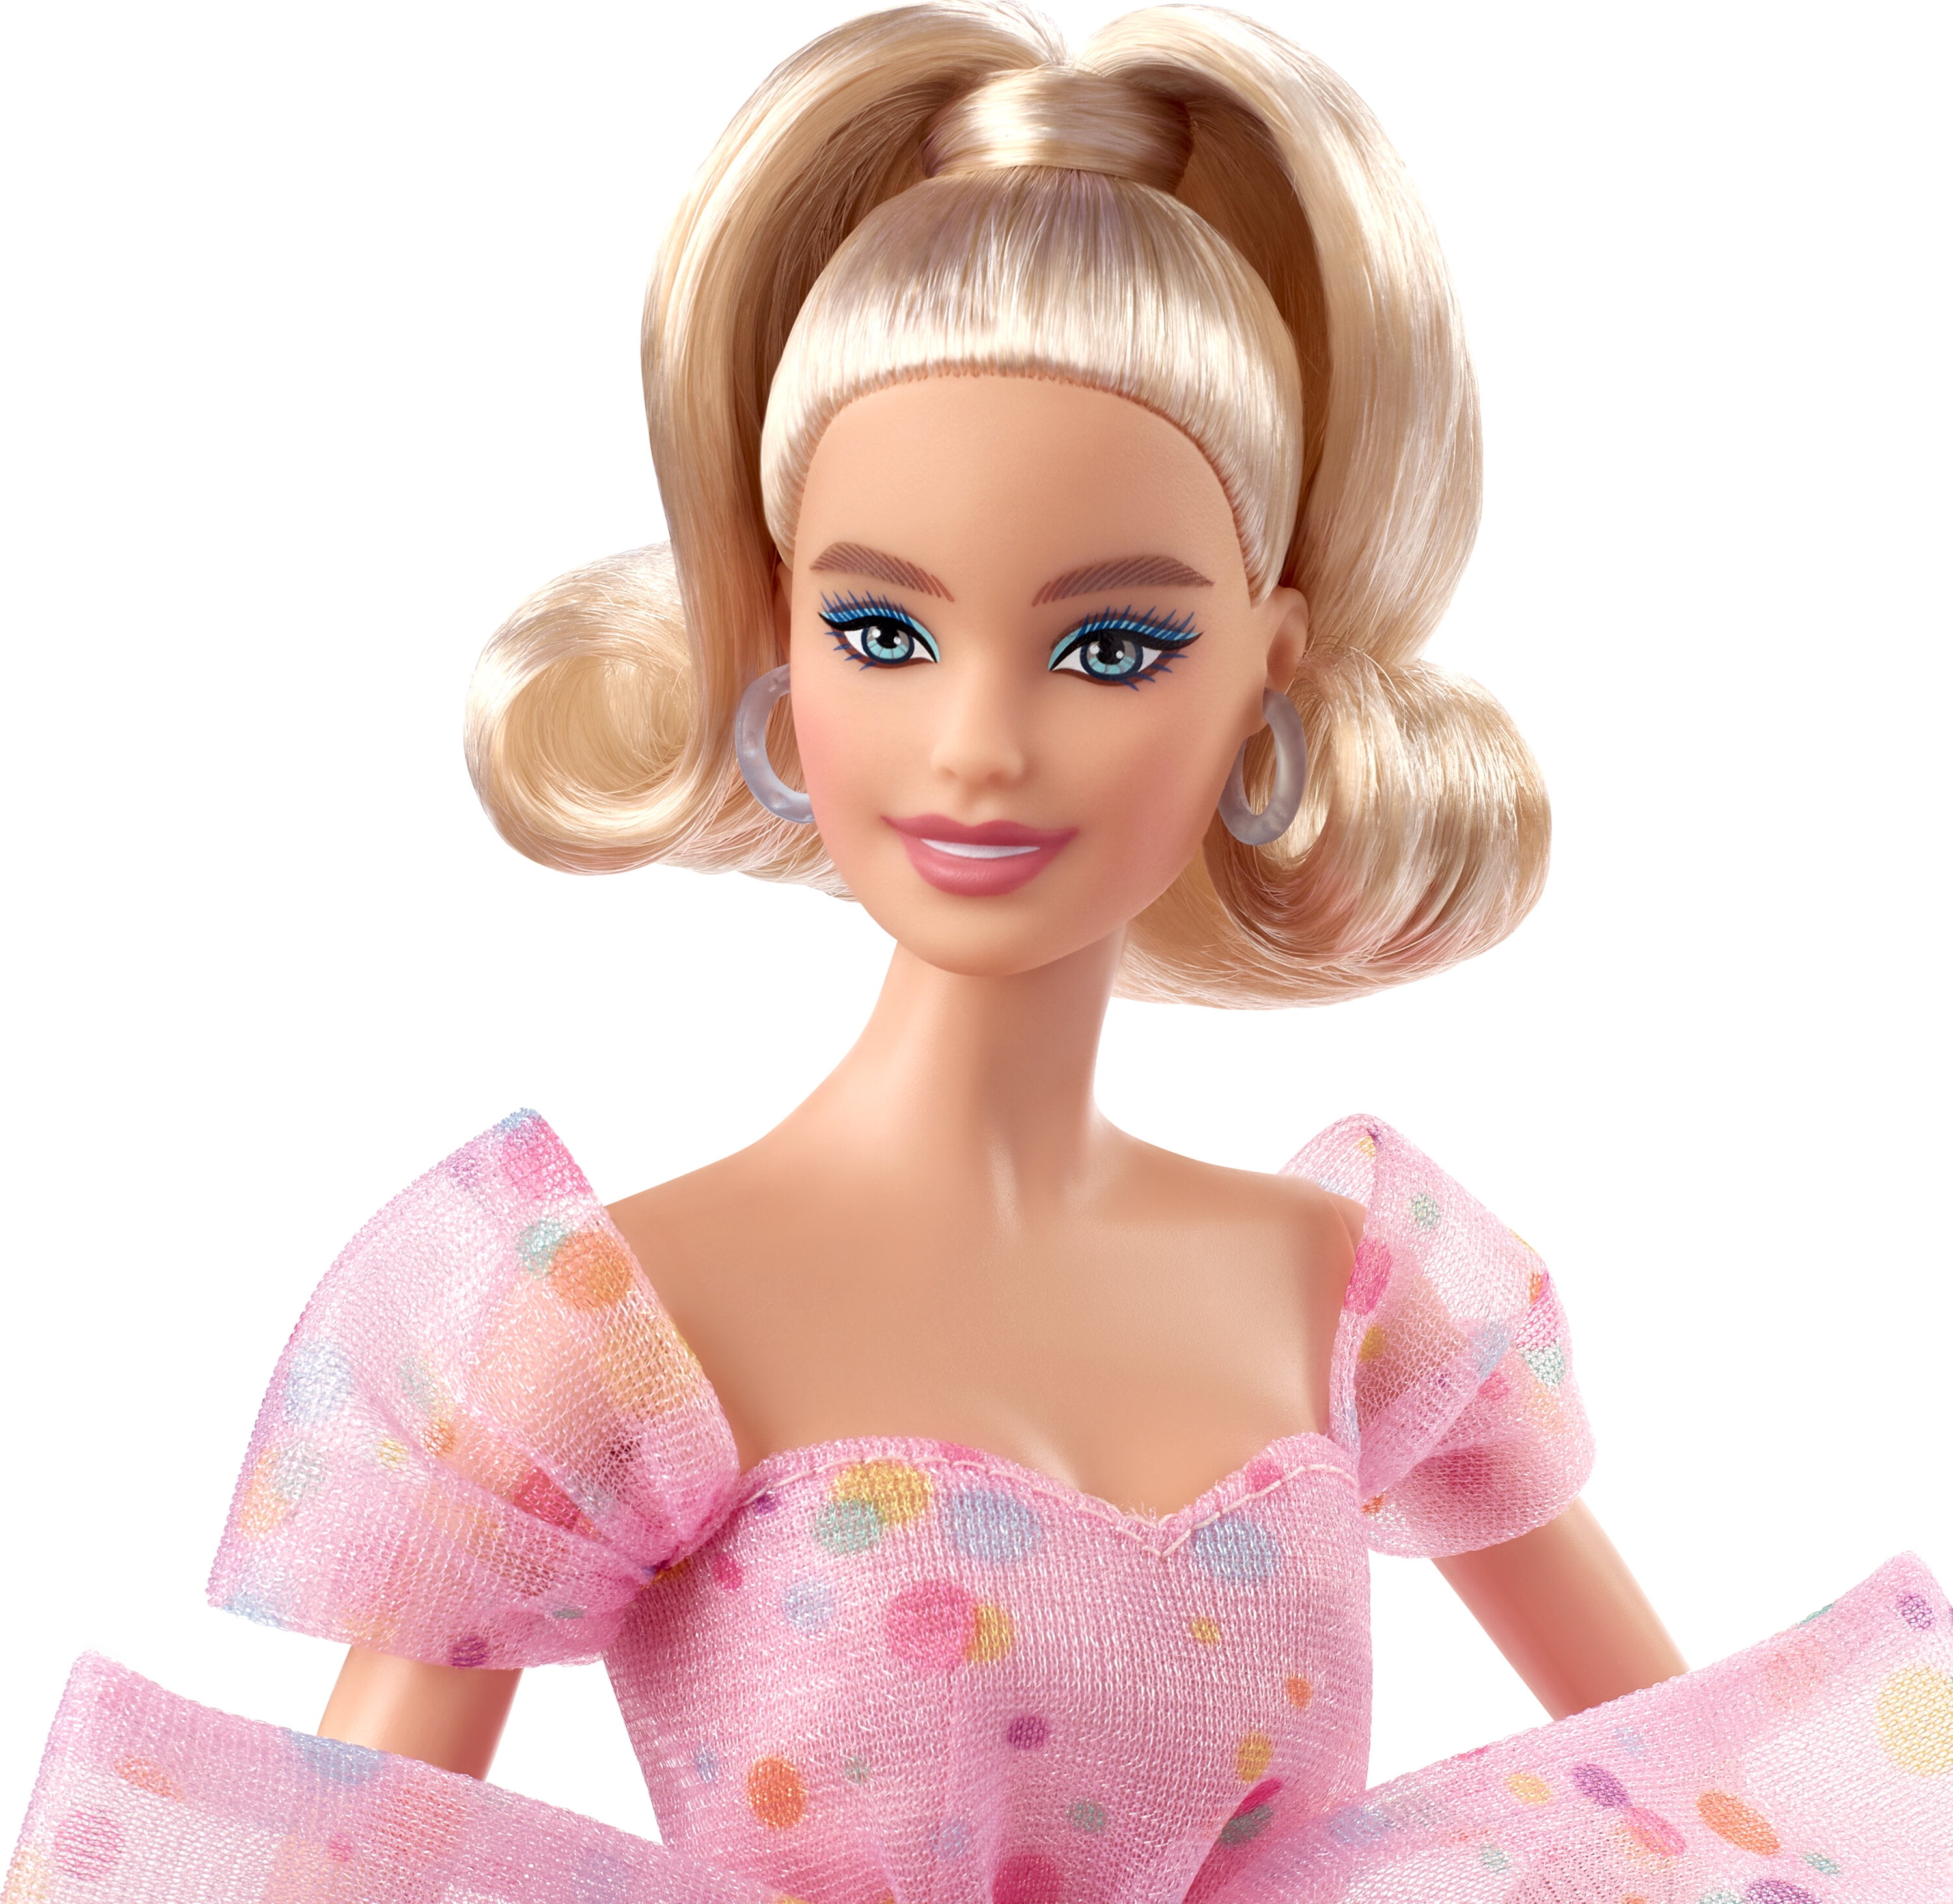 Barbie Signature Birthday Wishes Collector Doll : Target